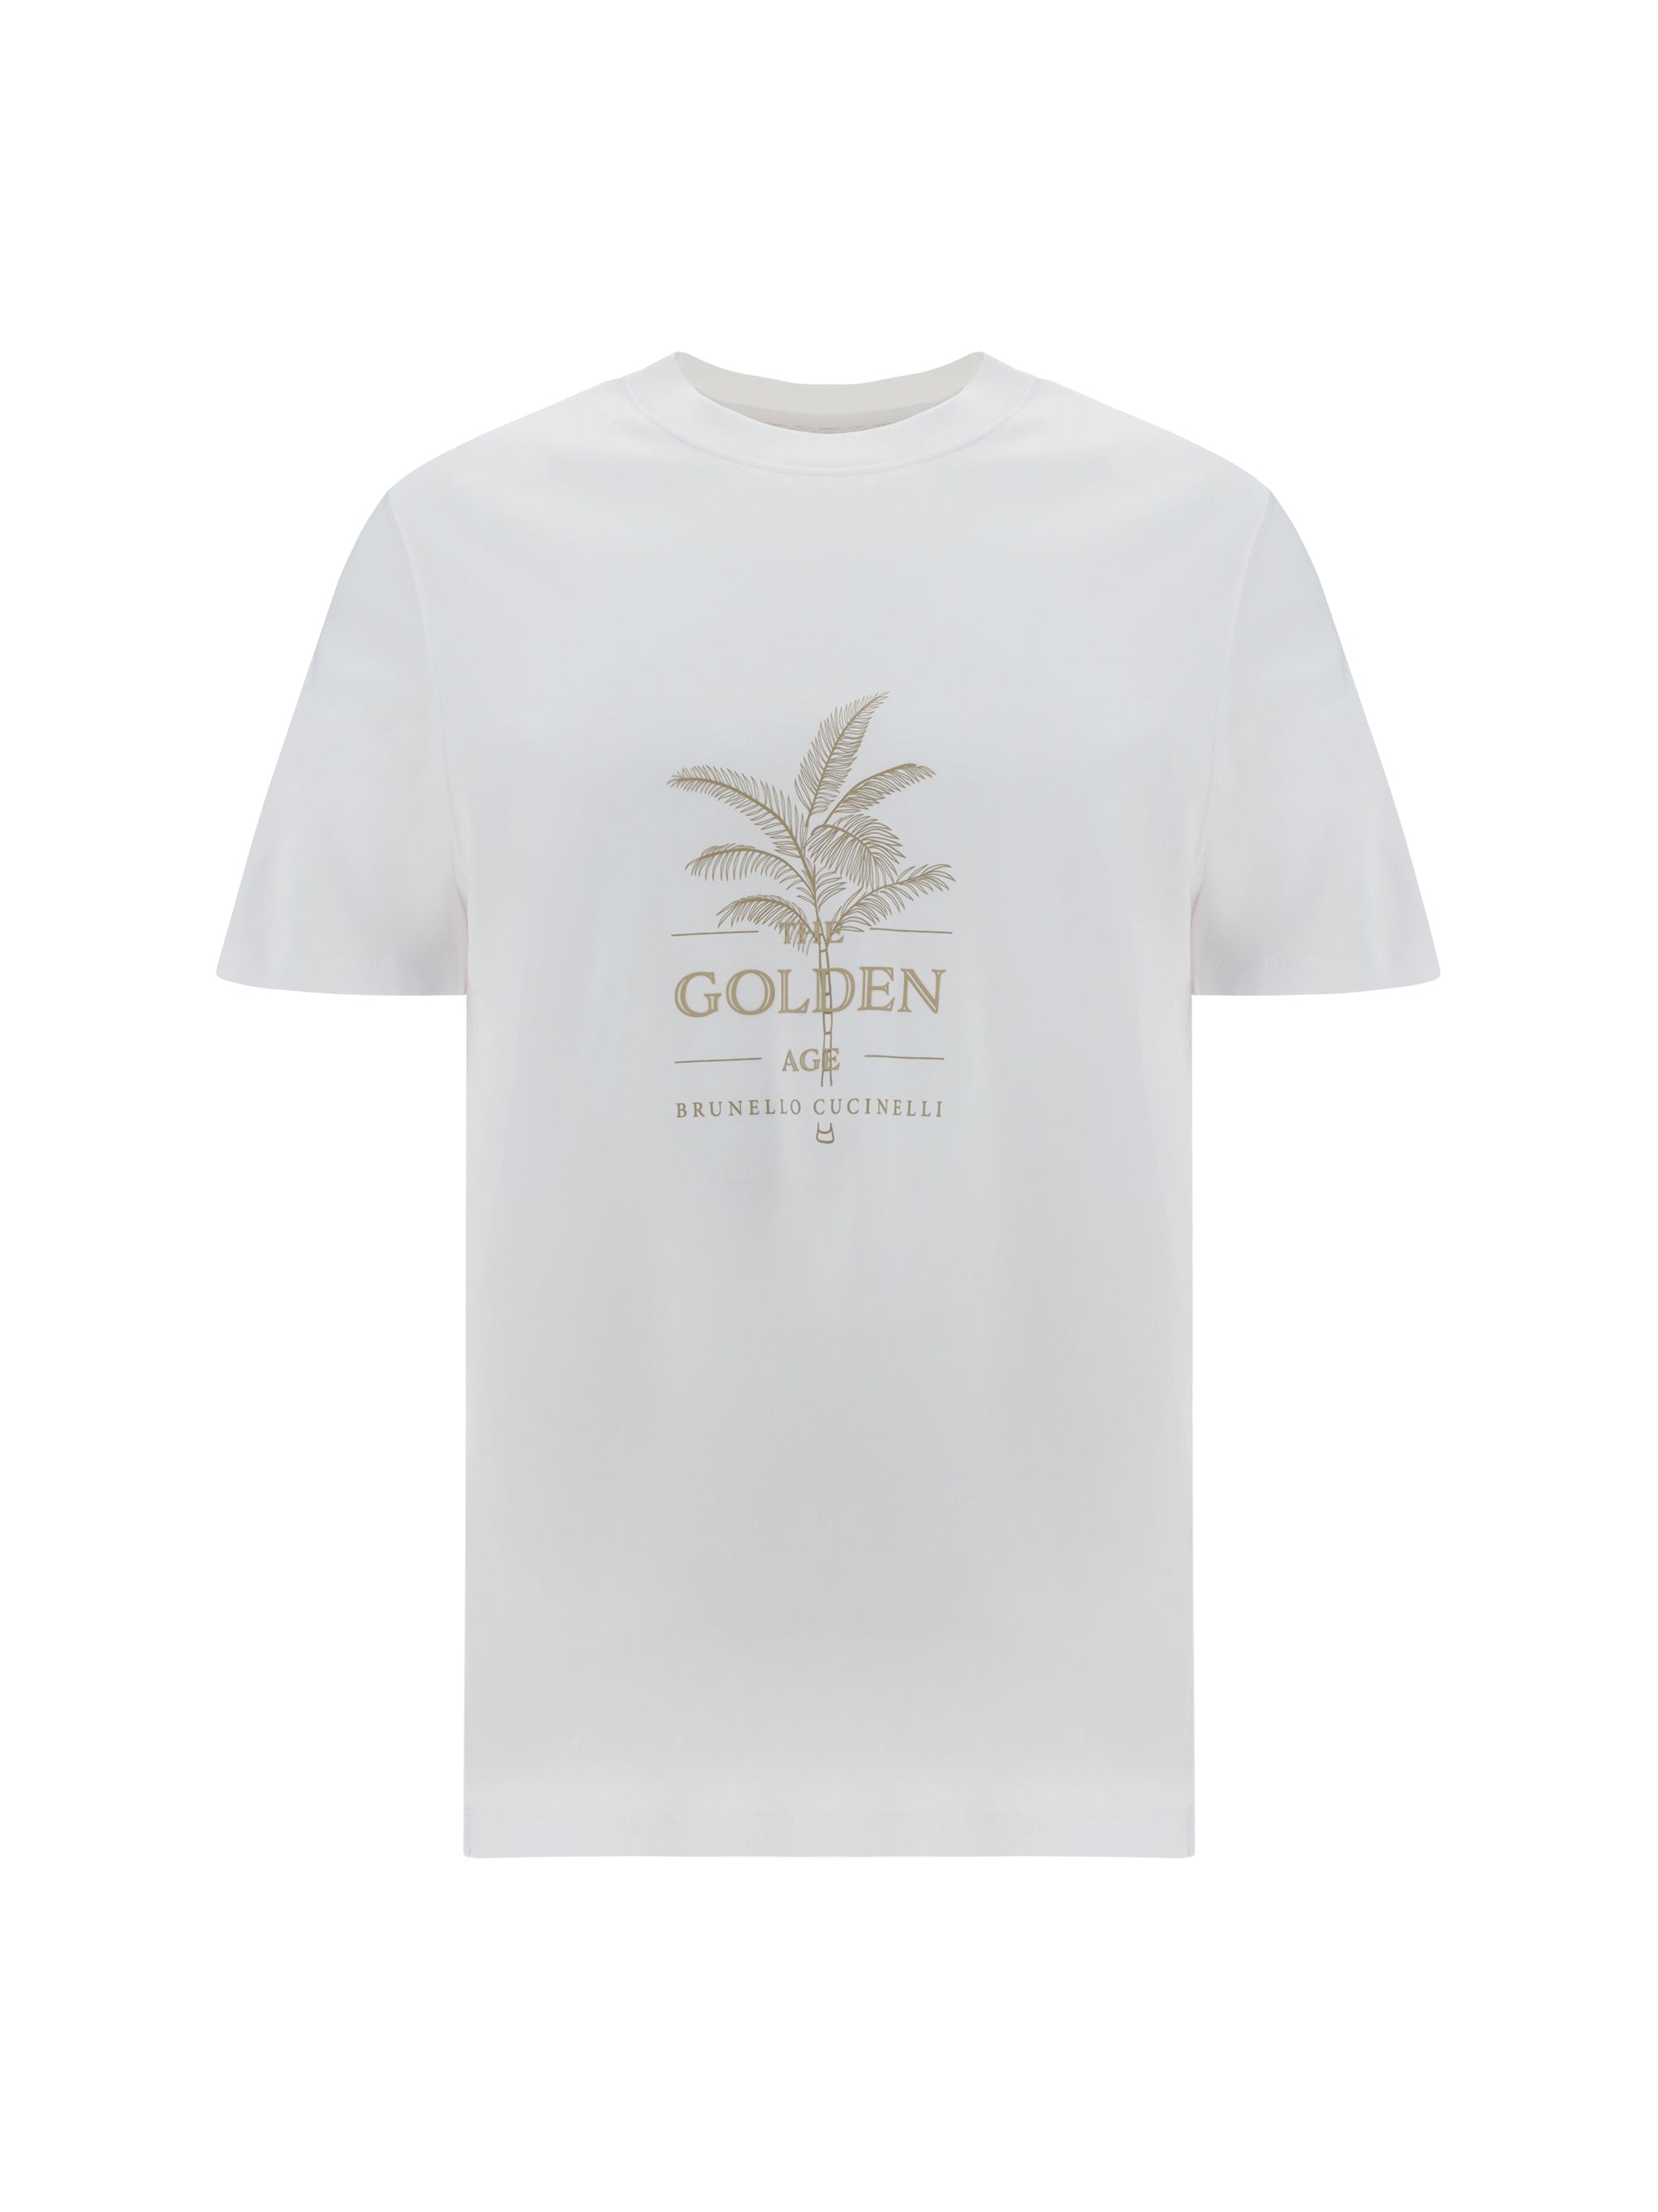 T-shirt in cotone con stampa frontale